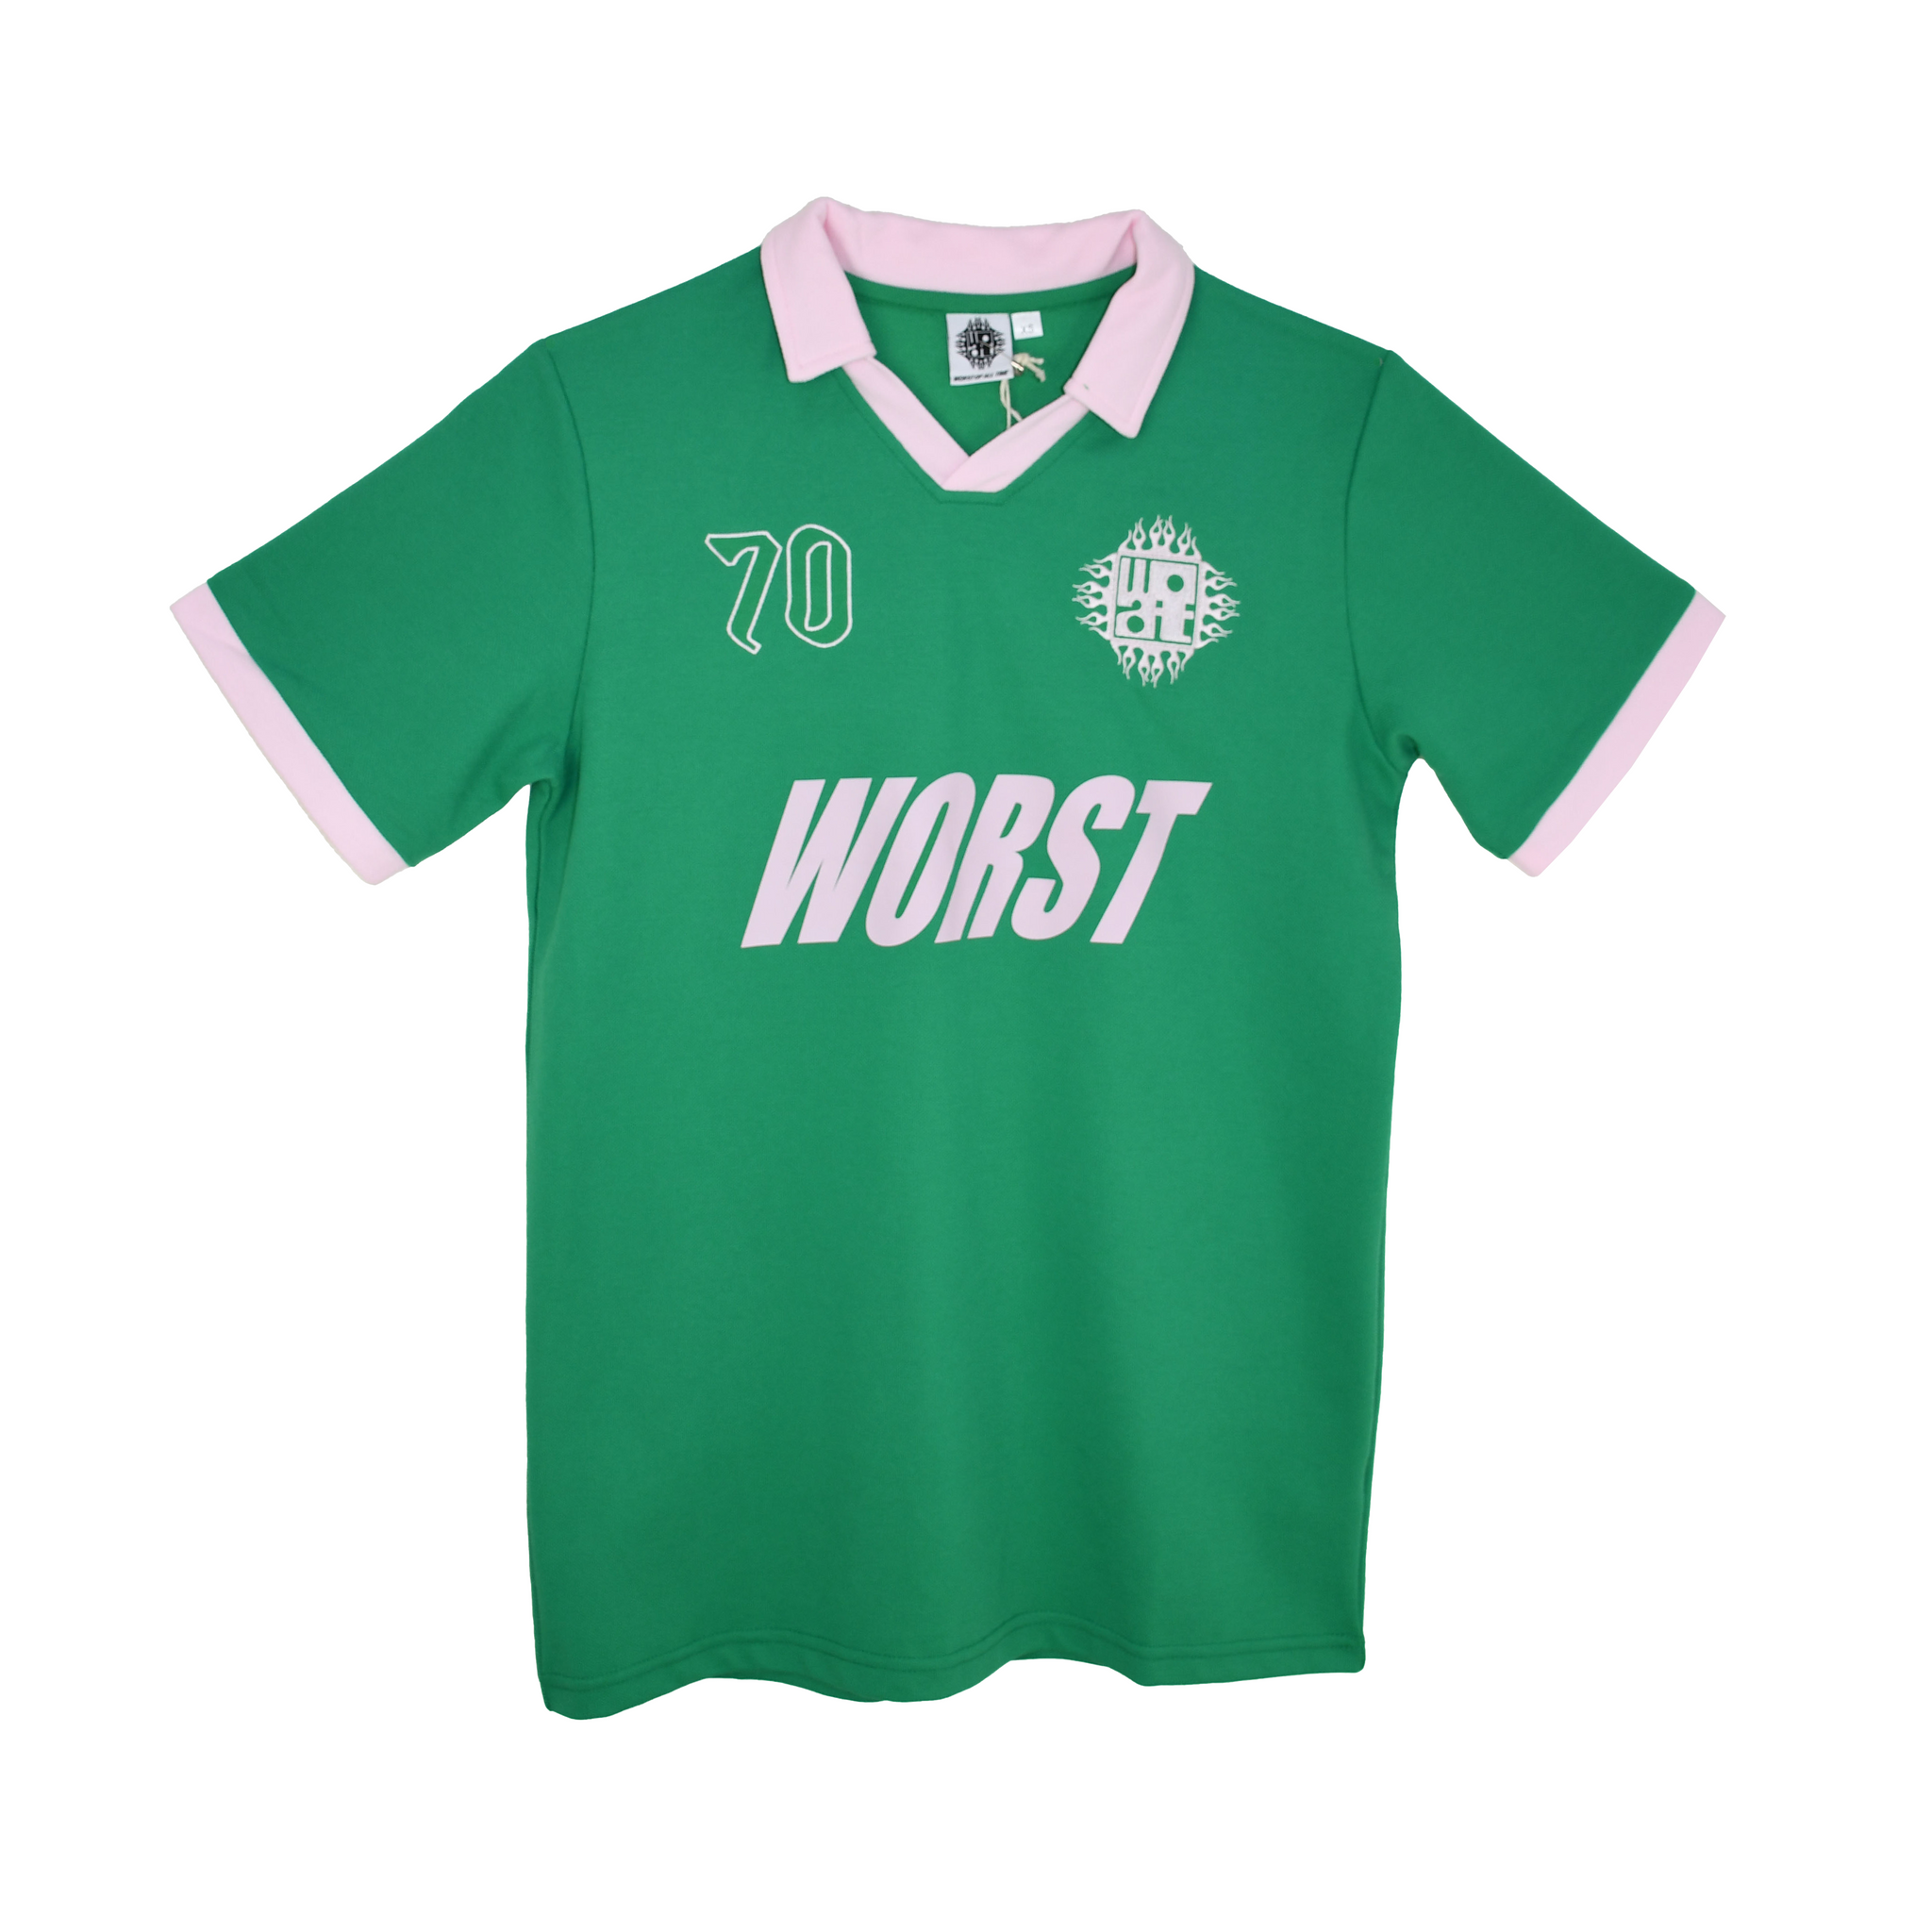 WOAT - Worst 70 'Rich Dad' Polo Green